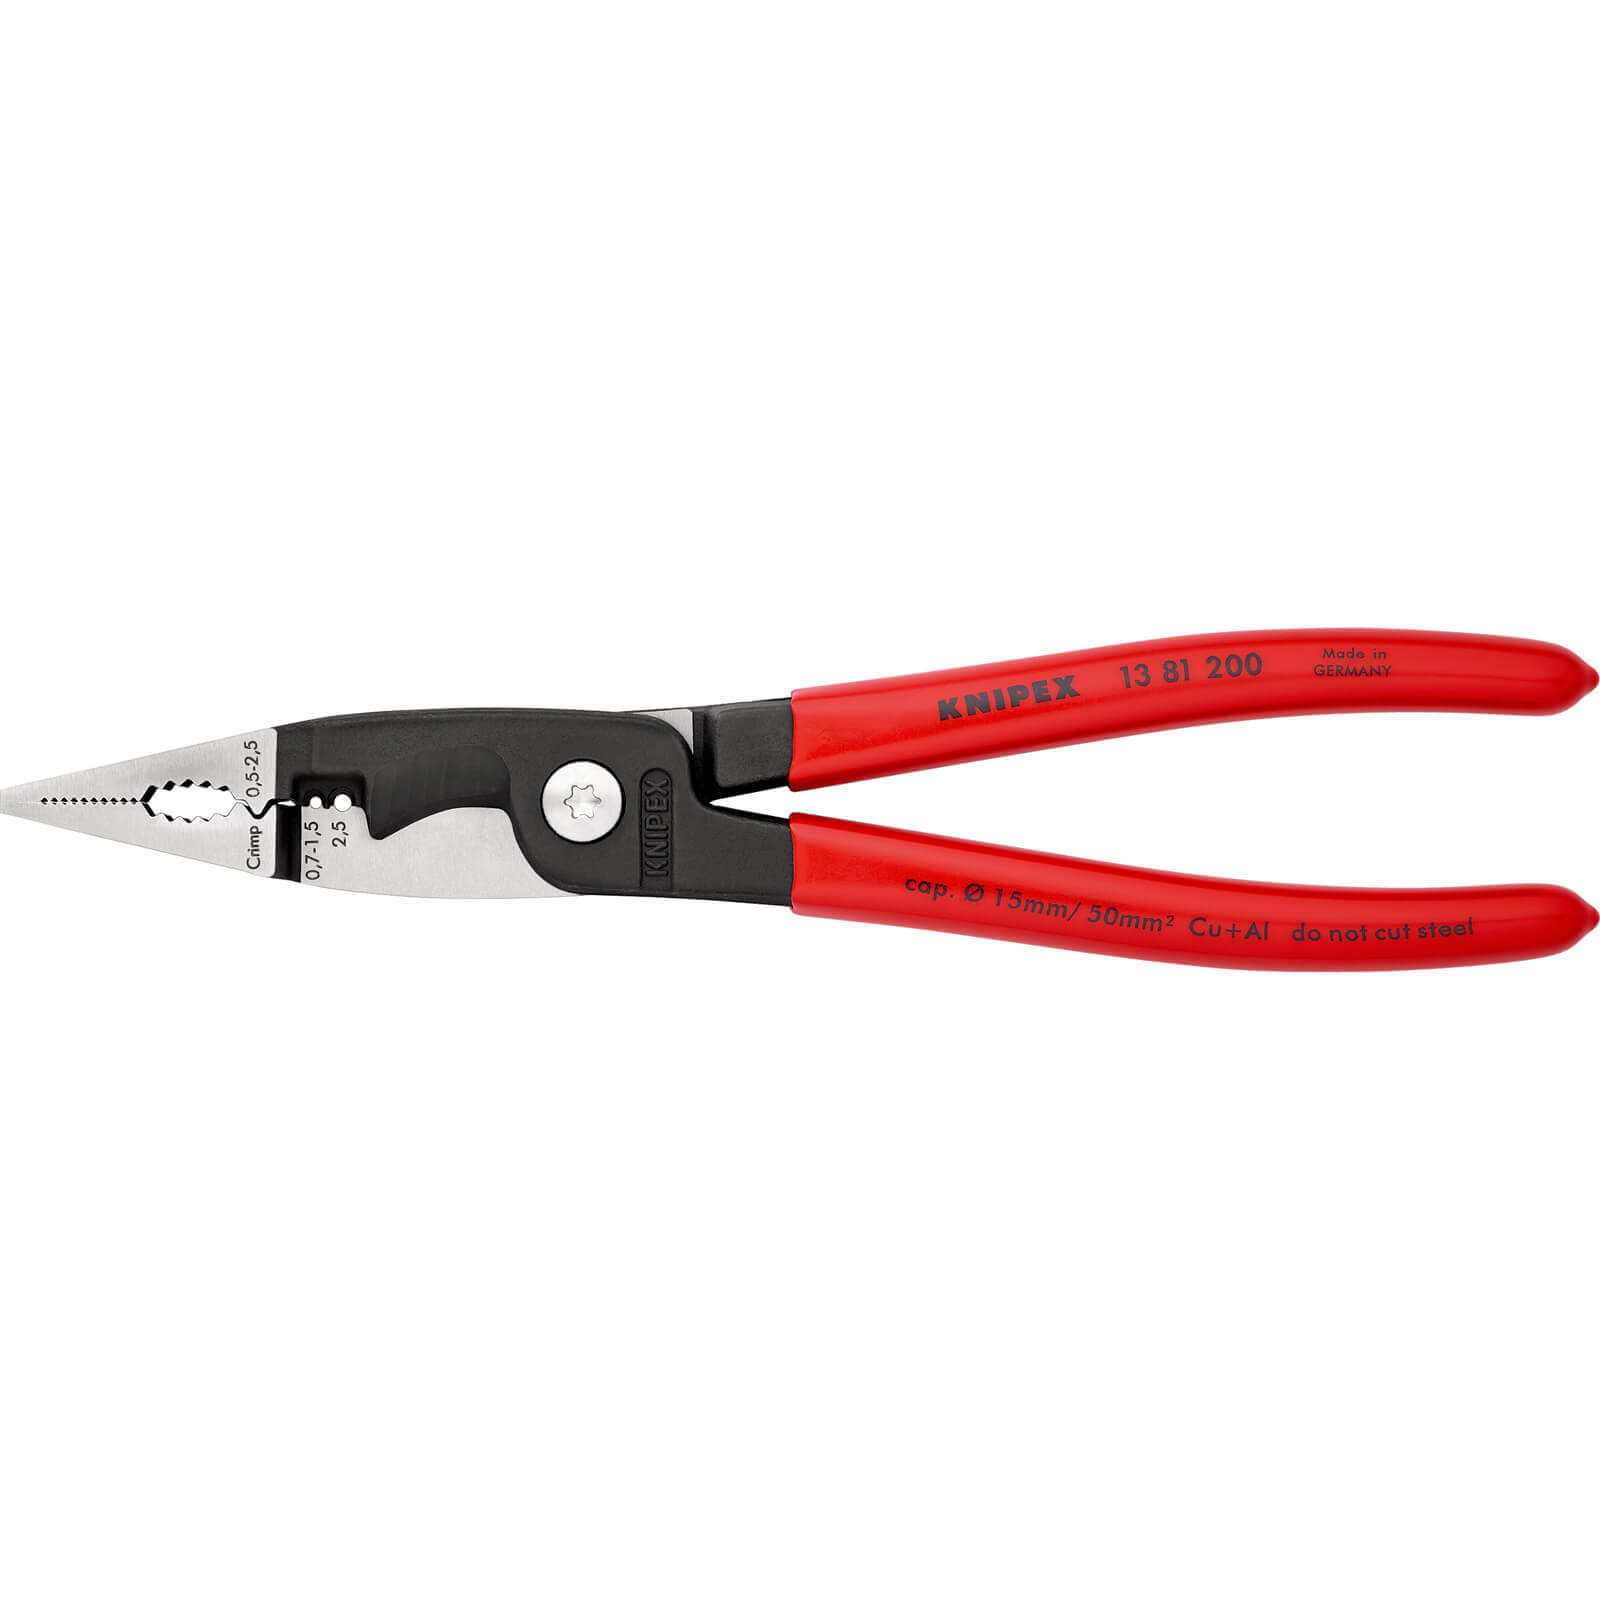 Knipex 13 81 Electrical Installation Pliers 200mm